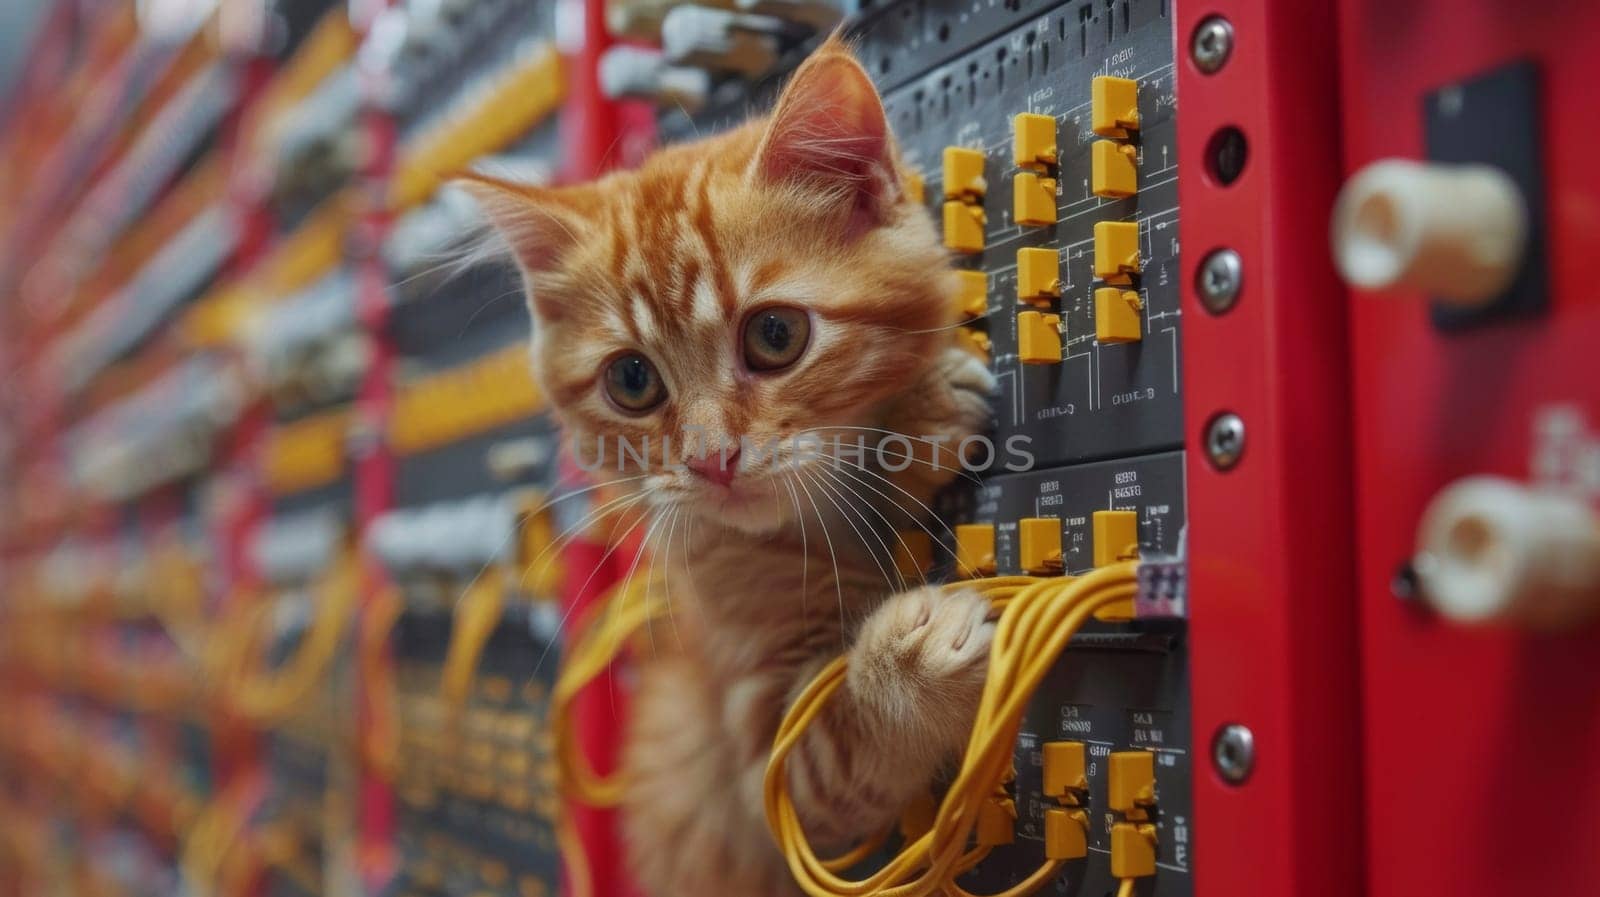 A cat is climbing on a wall of wires and switches